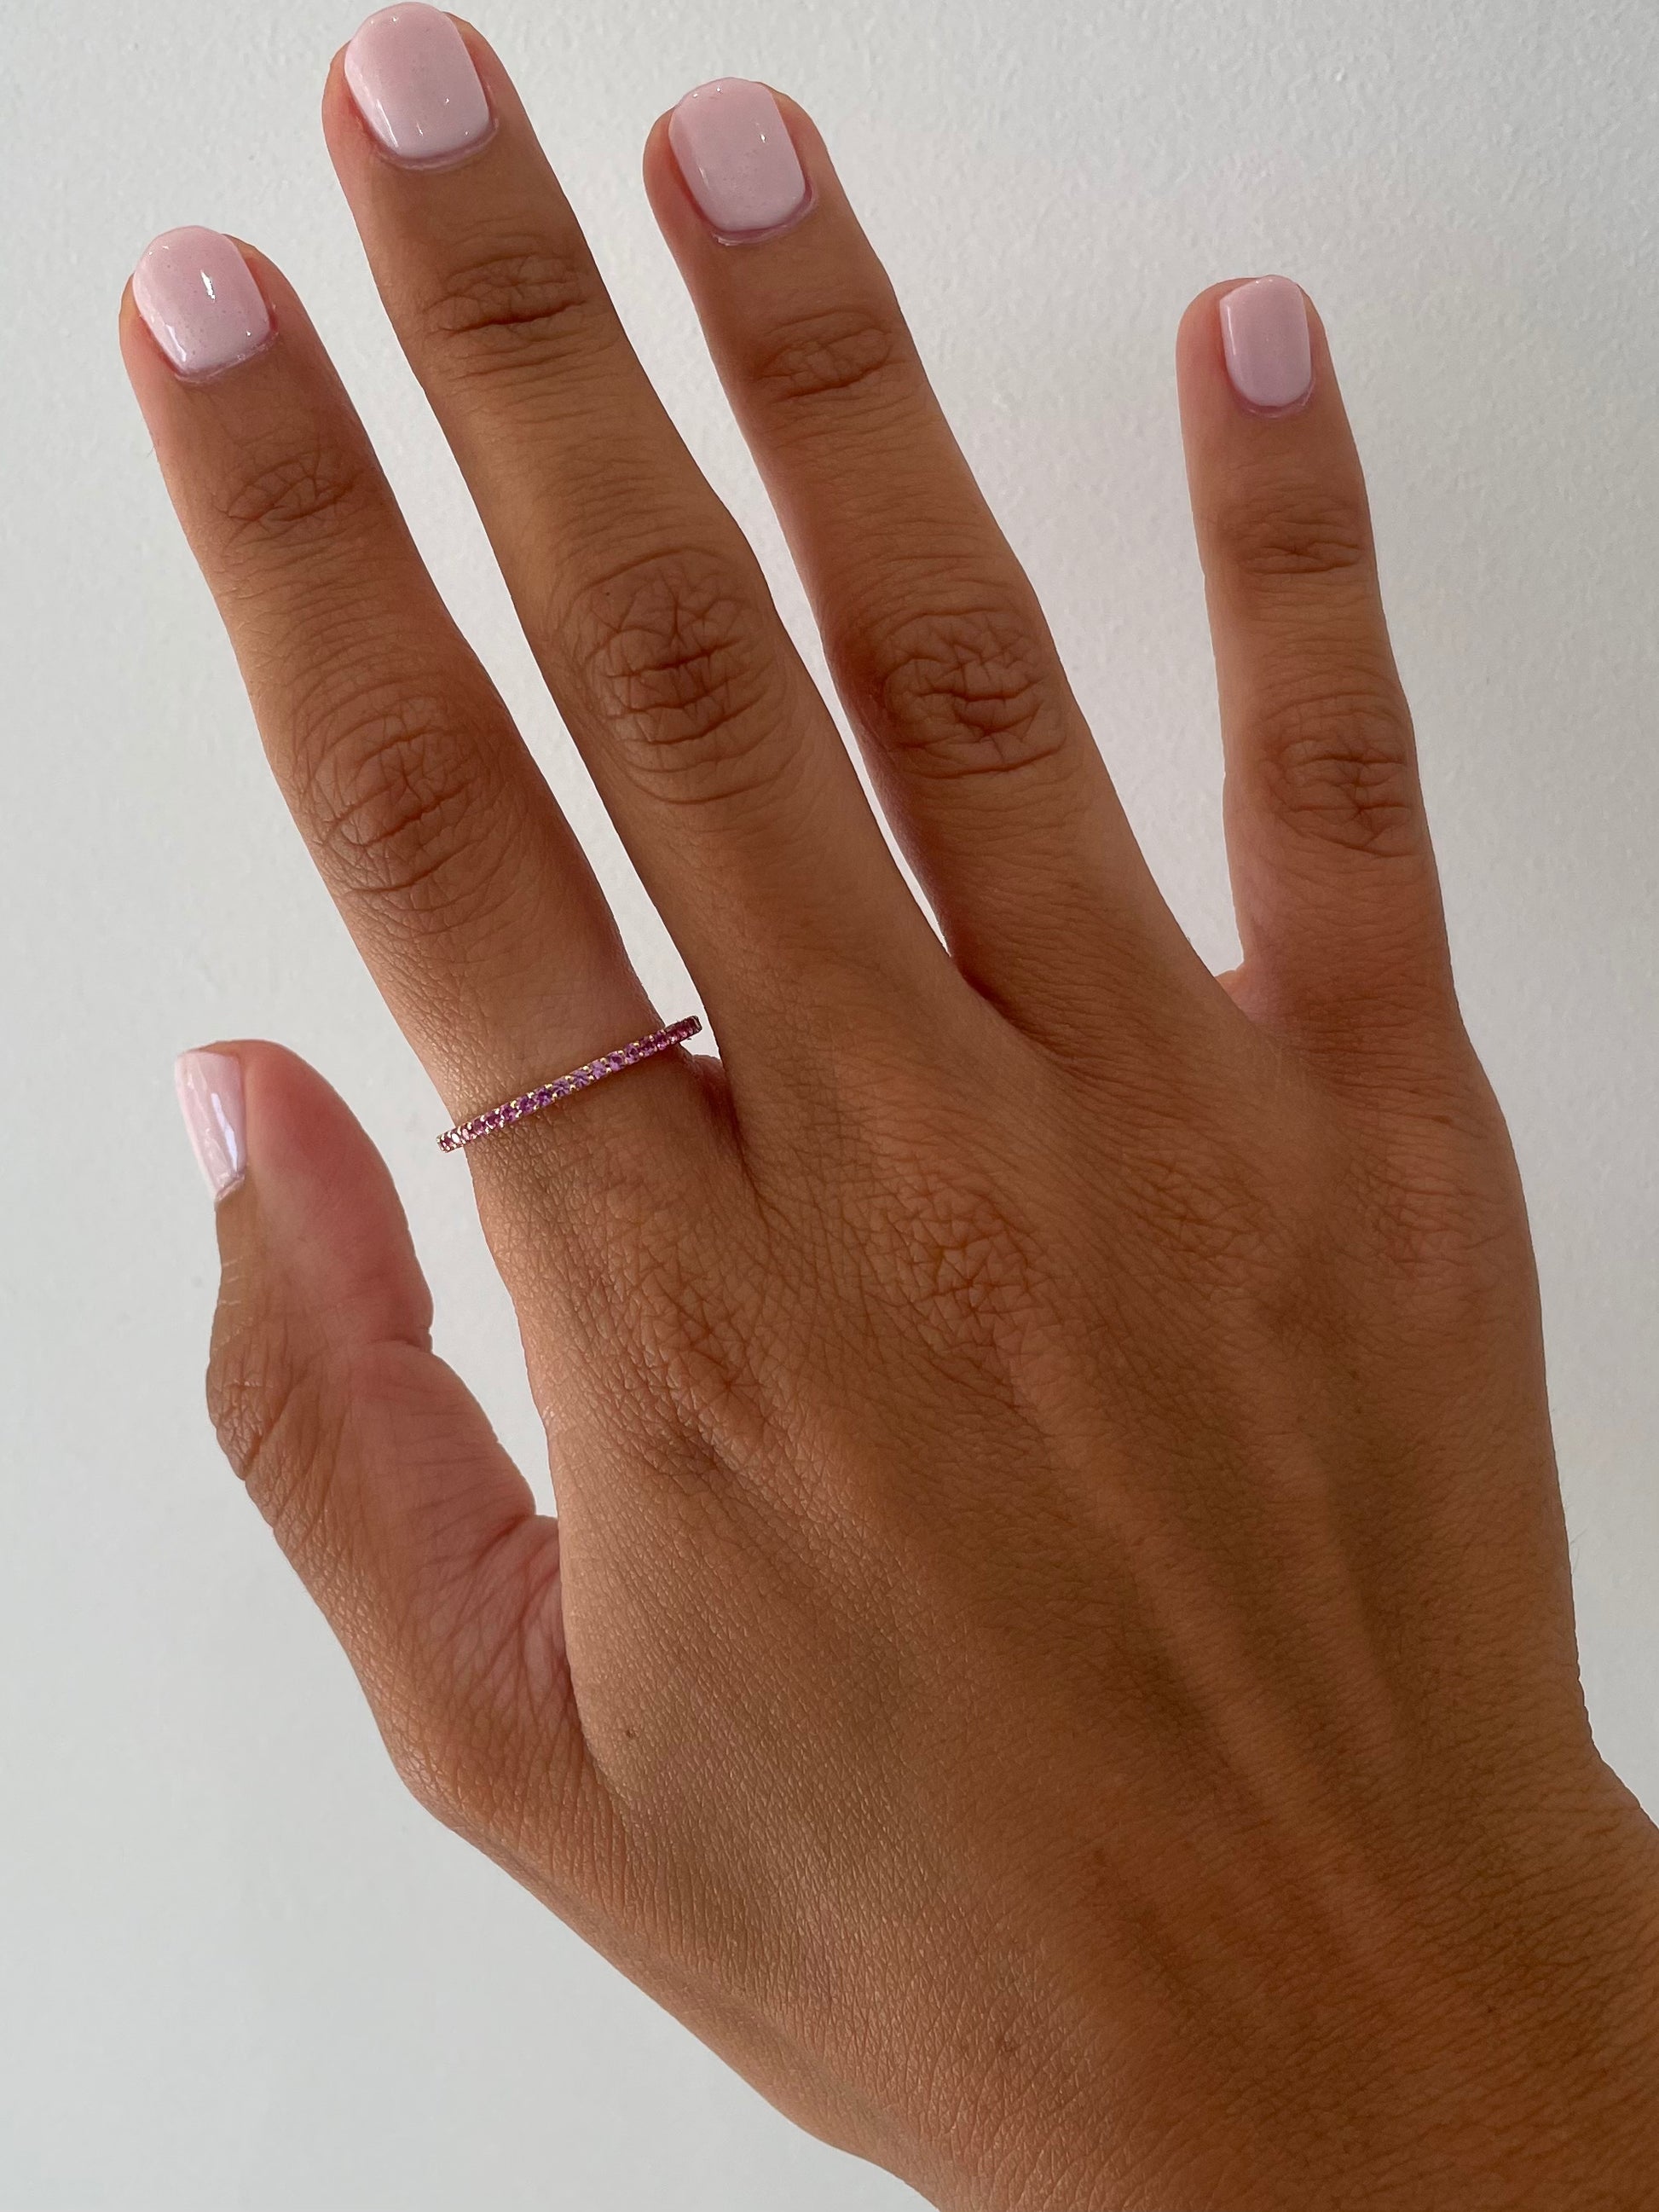 "Eliza" Stackable Pavé Diamond Eternity Band- Pink - - Jewelry - Goldie Paris Jewelry - Ring